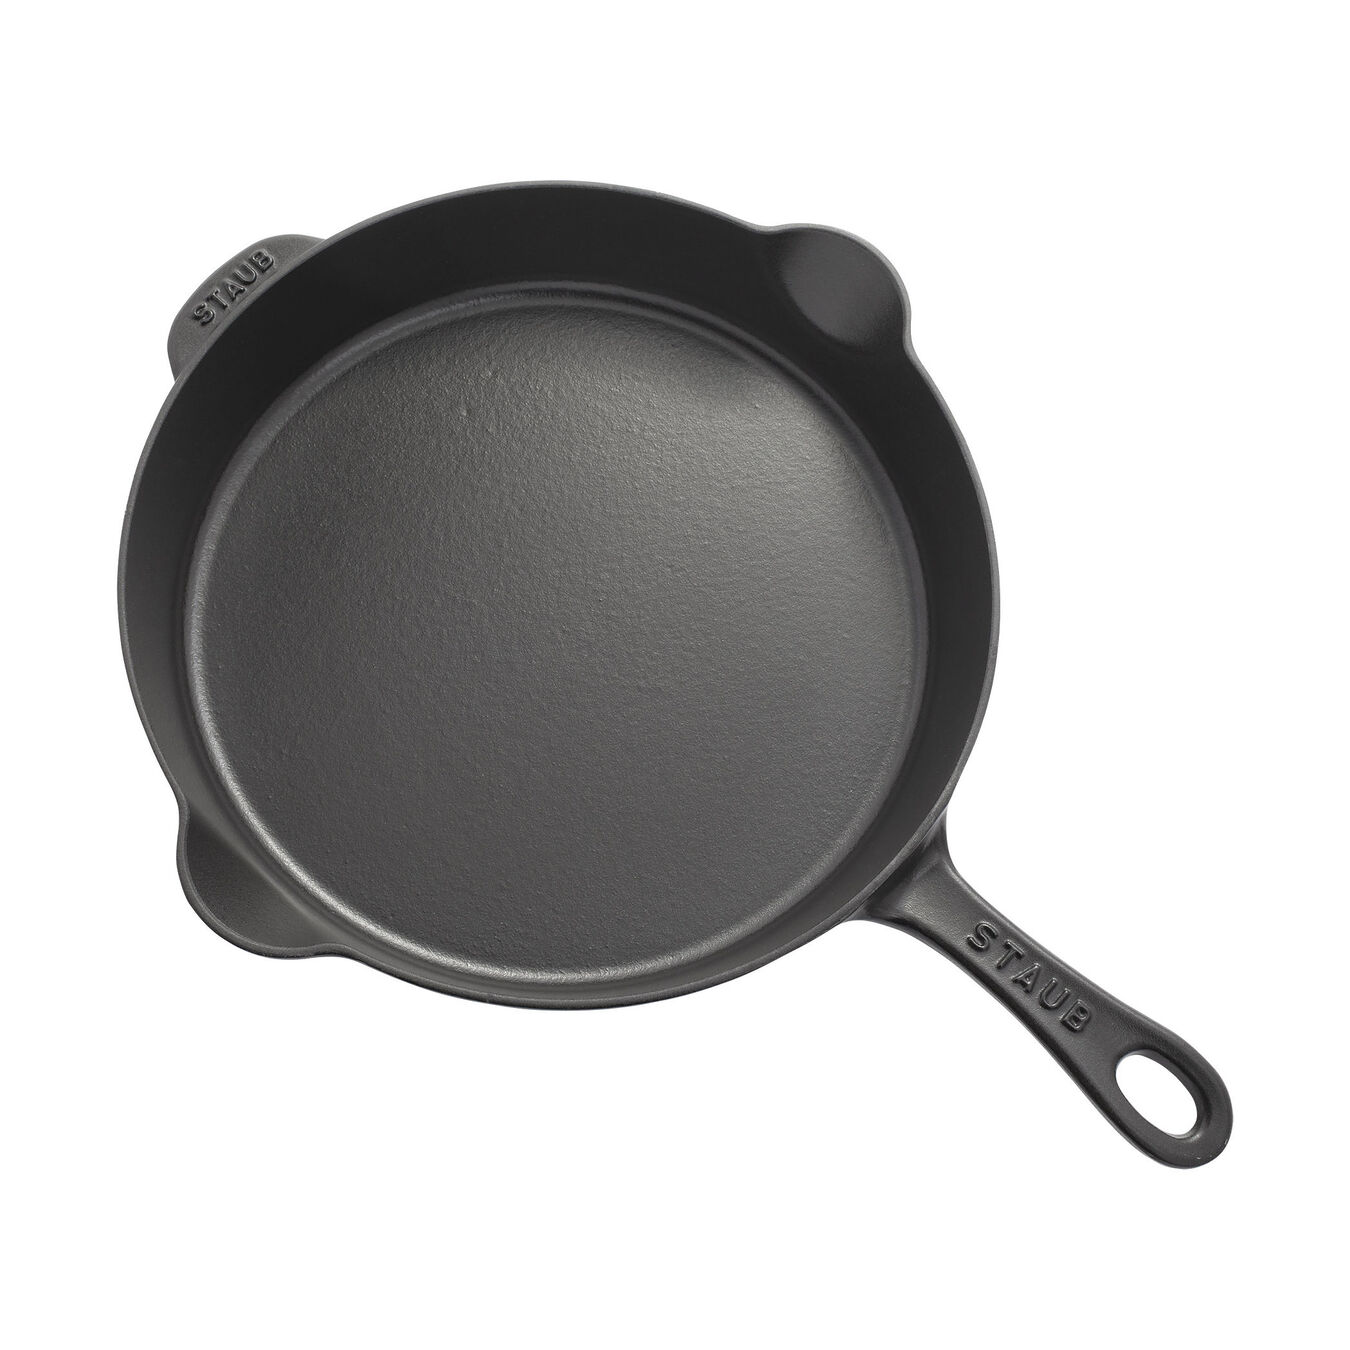 28 cm / 11 inch cast iron Frying pan, black - Visual Imperfections,,large 3